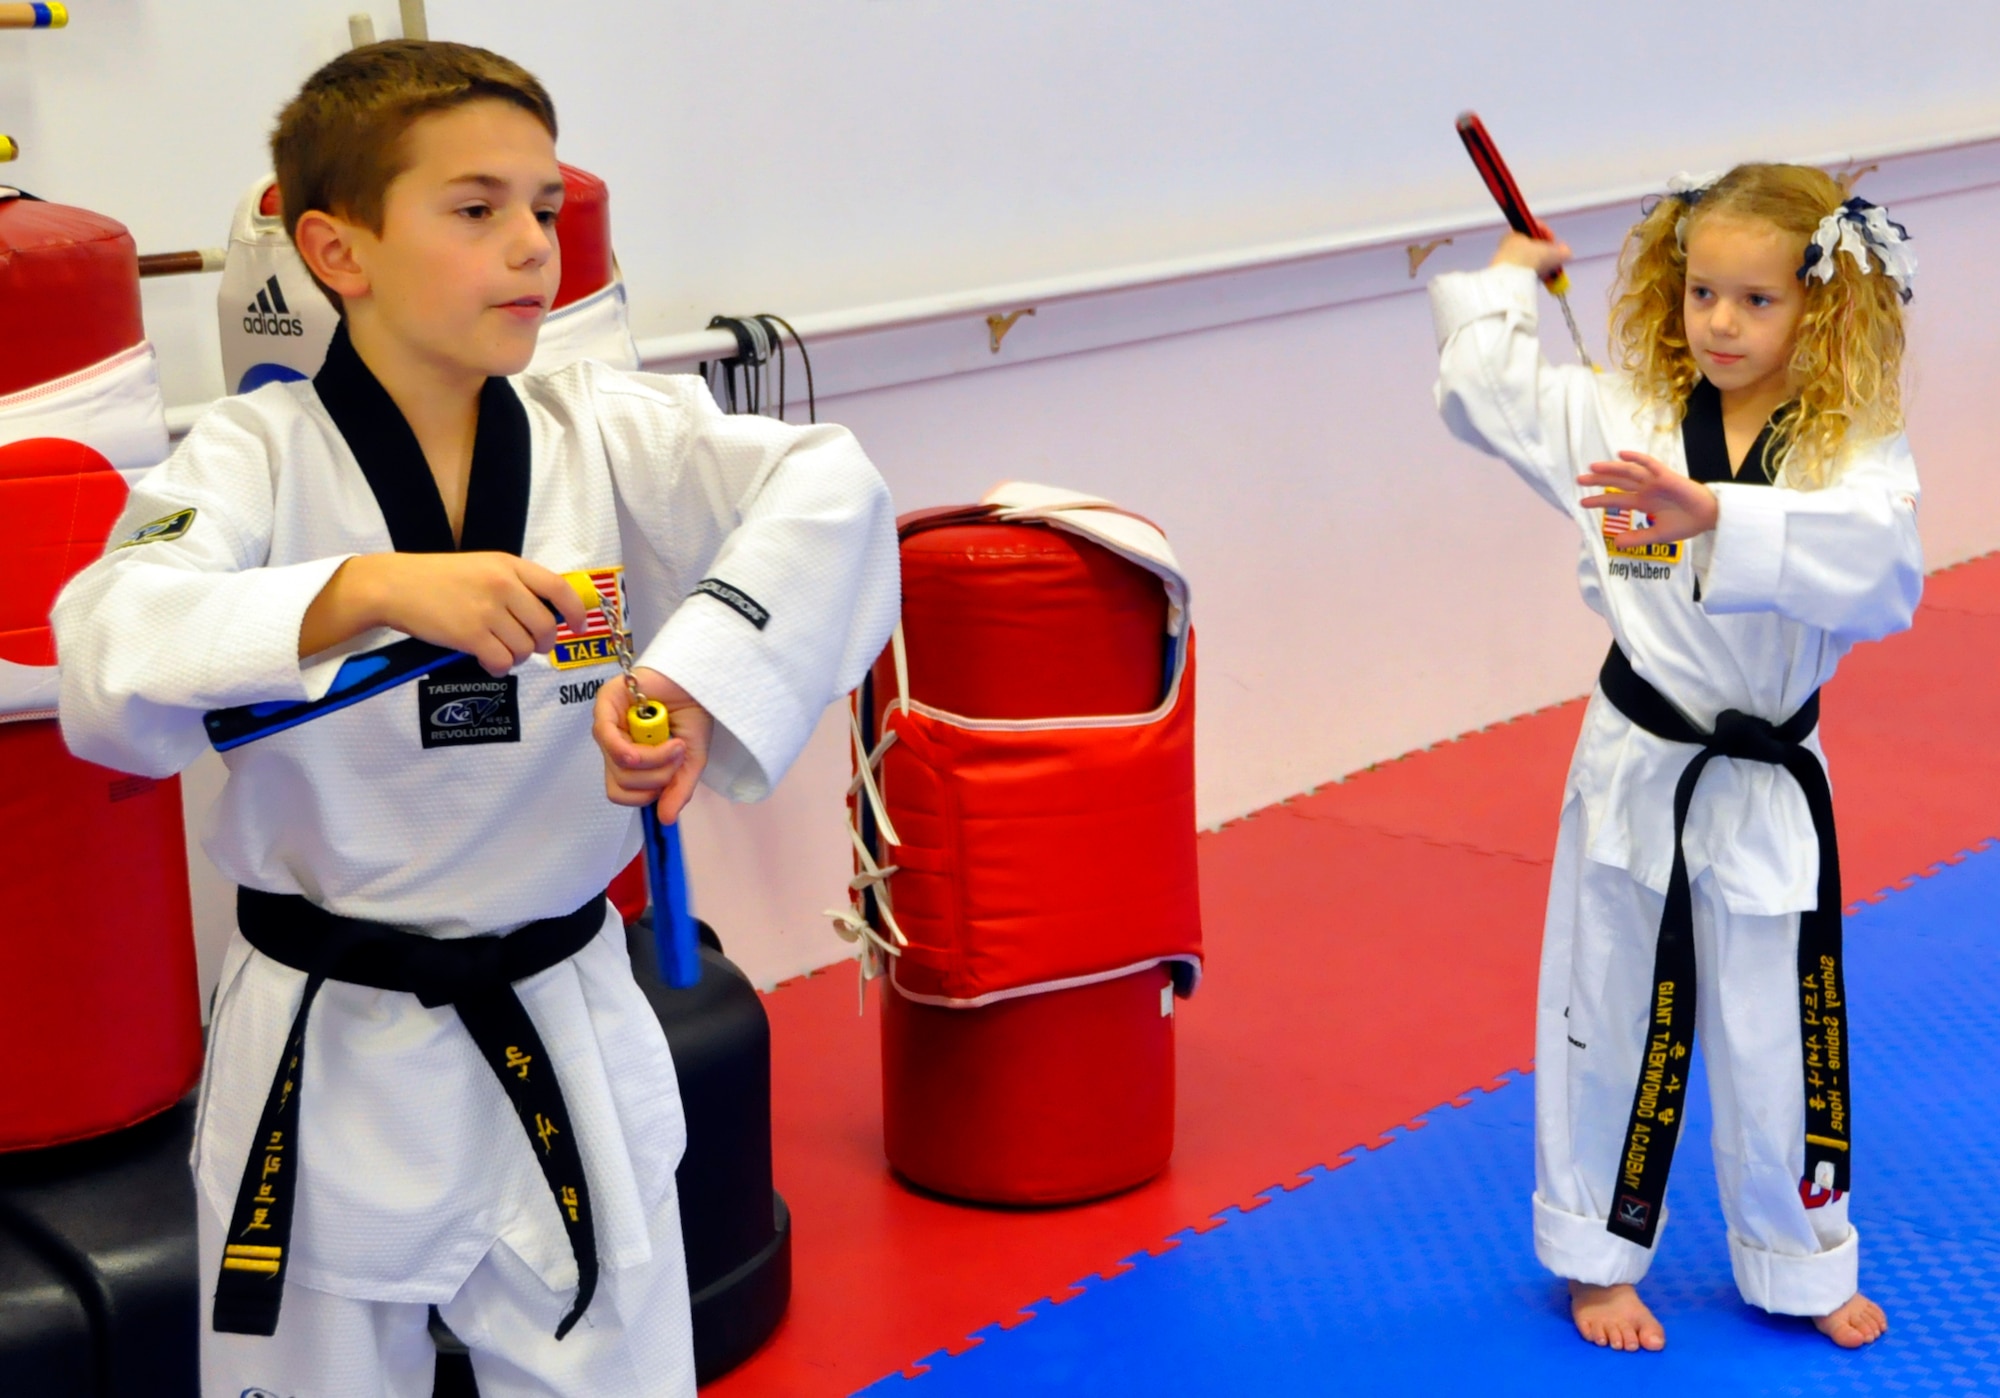 Simon DeLibero, a 446th Airlift Wing Reservist's son, practices nunchuck skills with his sister, Sidney, at a taekwondo school in Edgewood, Wash., Oct. 17. Activities like taekwondo helped Simon, a second-degree black belt, and his sister, a first-degree black belt, get through their father's military responsibilities away from home. (U.S. Air Force photo/Staff Sgt. Rachael Garneau)